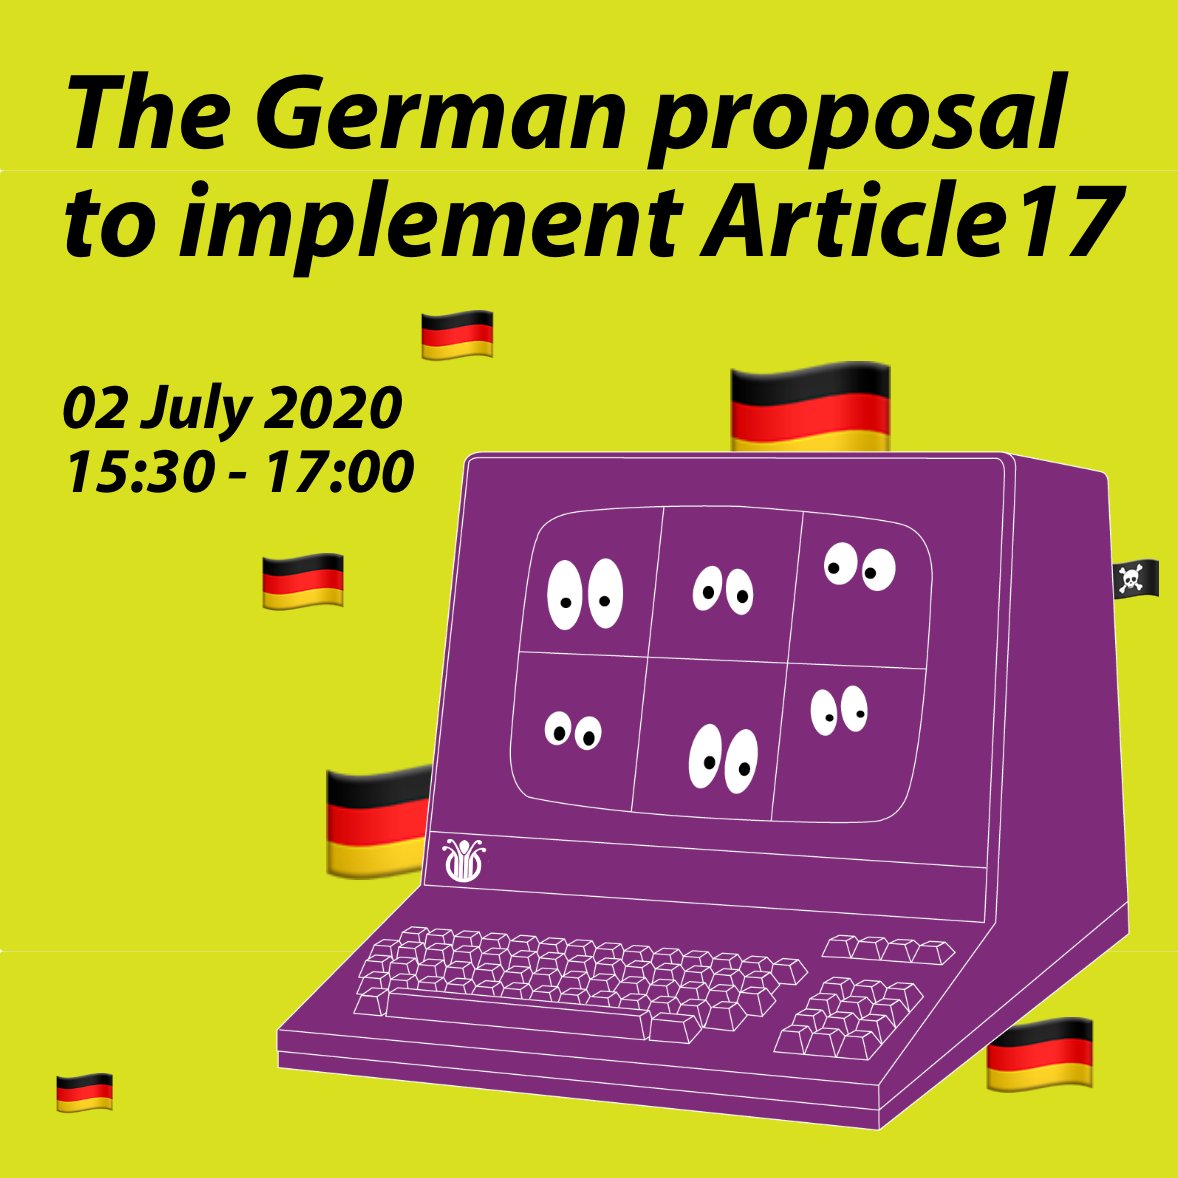 Next Thursday, the 2nd of July at 1530 we will organise the next COMMUNIA Salon. This time we will look at the German proposal to implement #article17 with @Senficon, @hutko, John Hendrik Weitzmann (@WikimediaDE) & others. Join us by registering here: communia-association.org/2020/06/26/487…